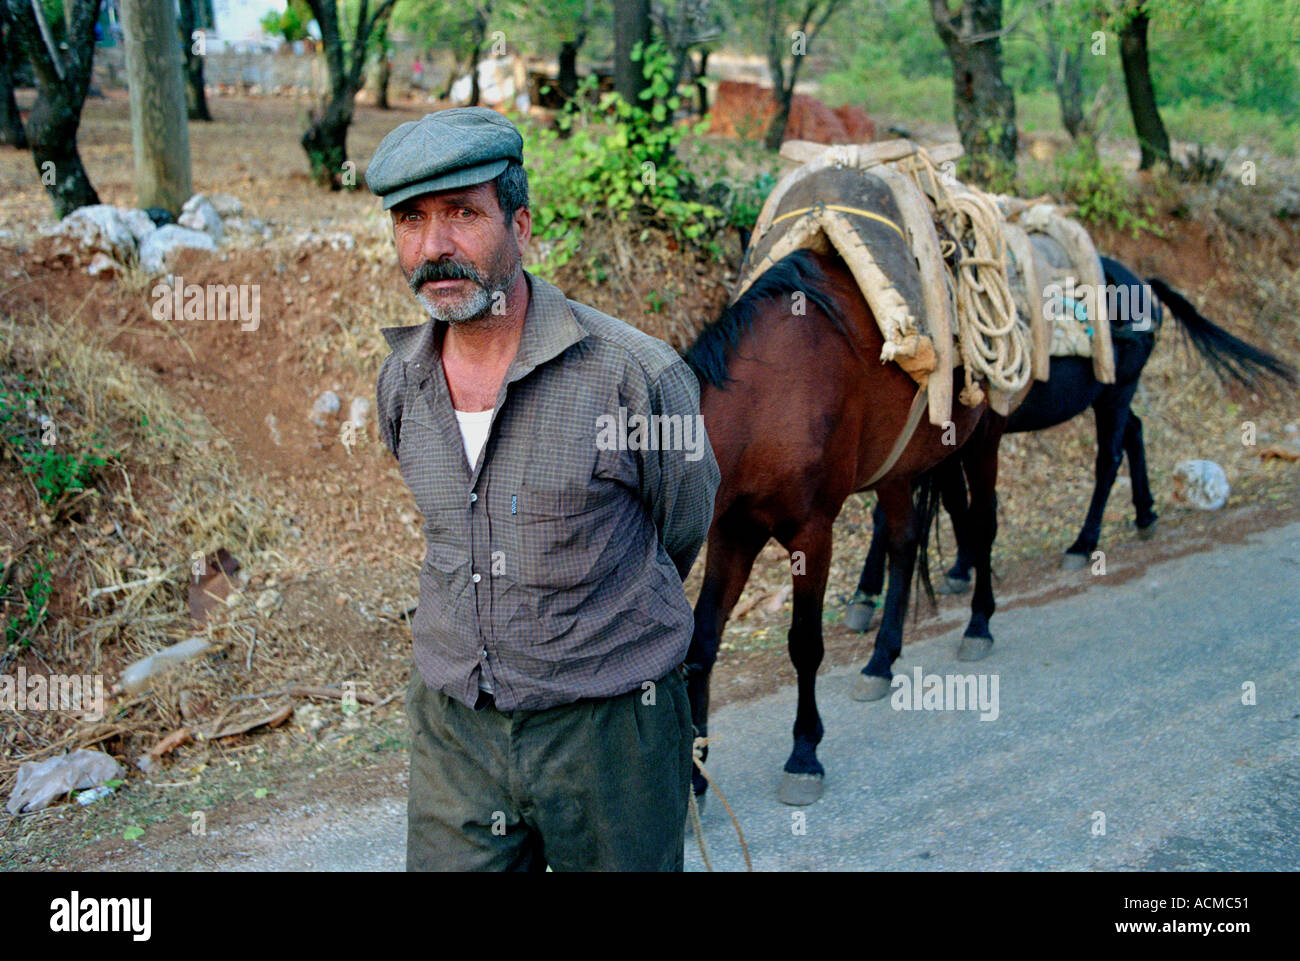 Village life in South eastern Turkey. Stock Photo